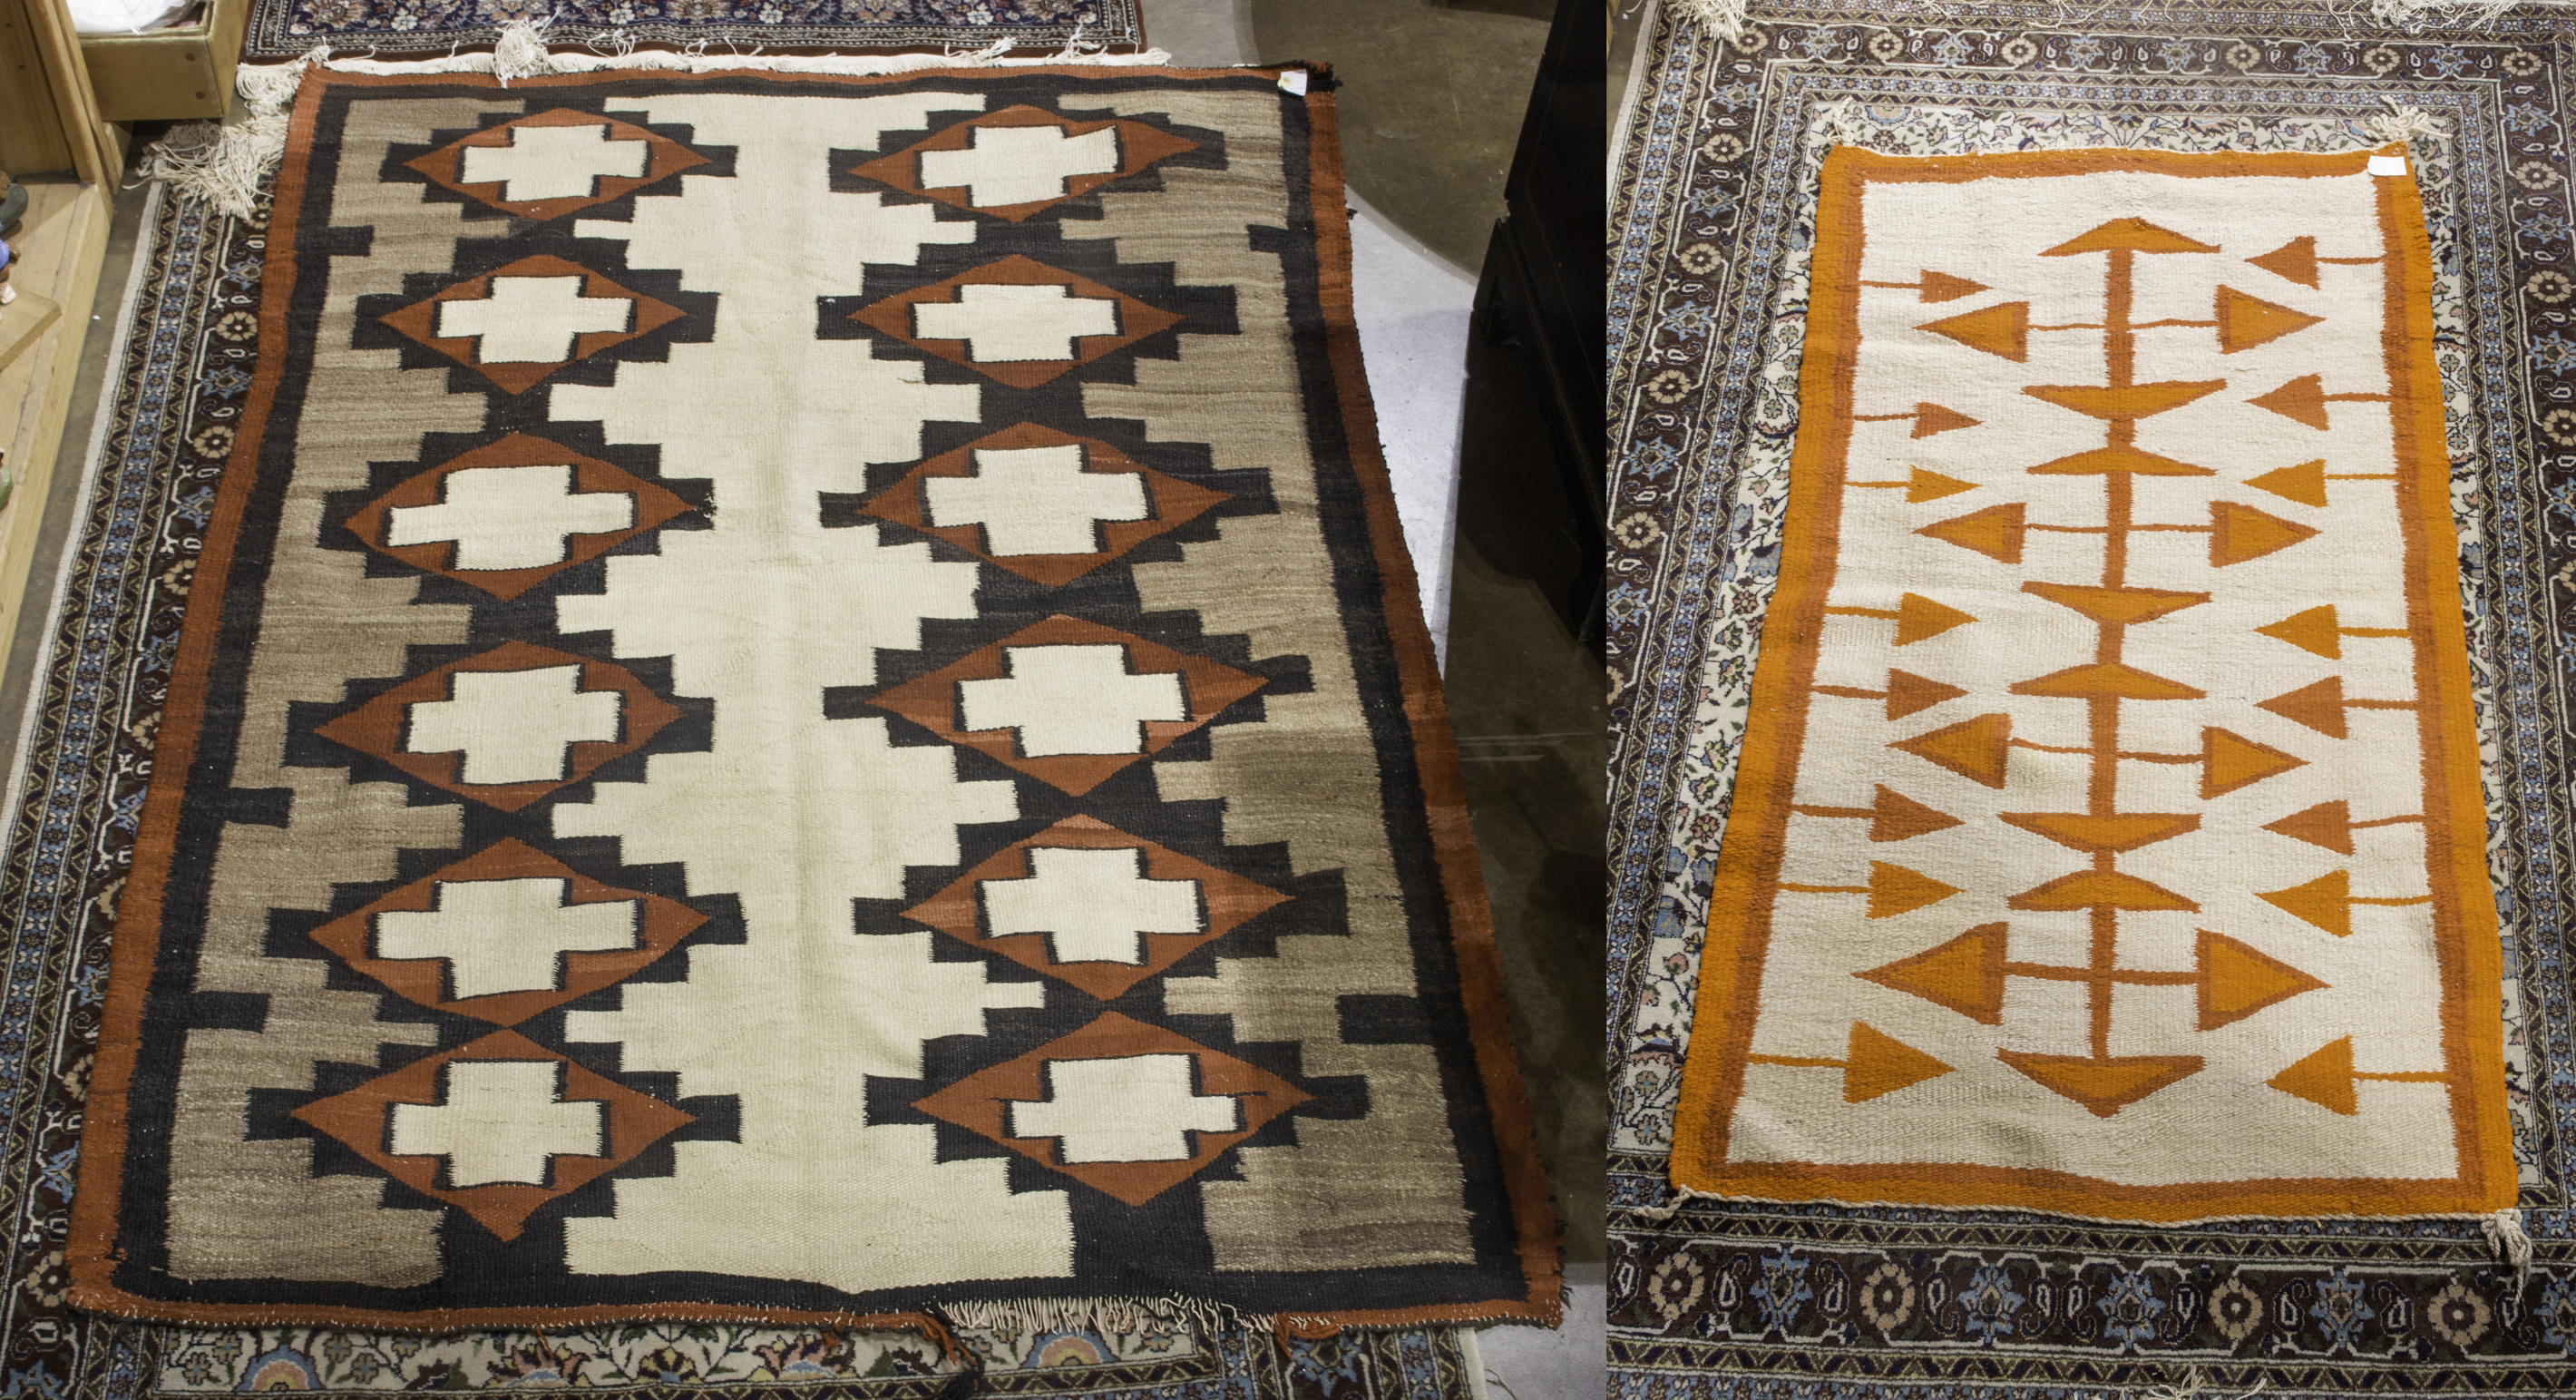  LOT OF 2 NAVAJO RUGS THE FIRST 3a4a8f